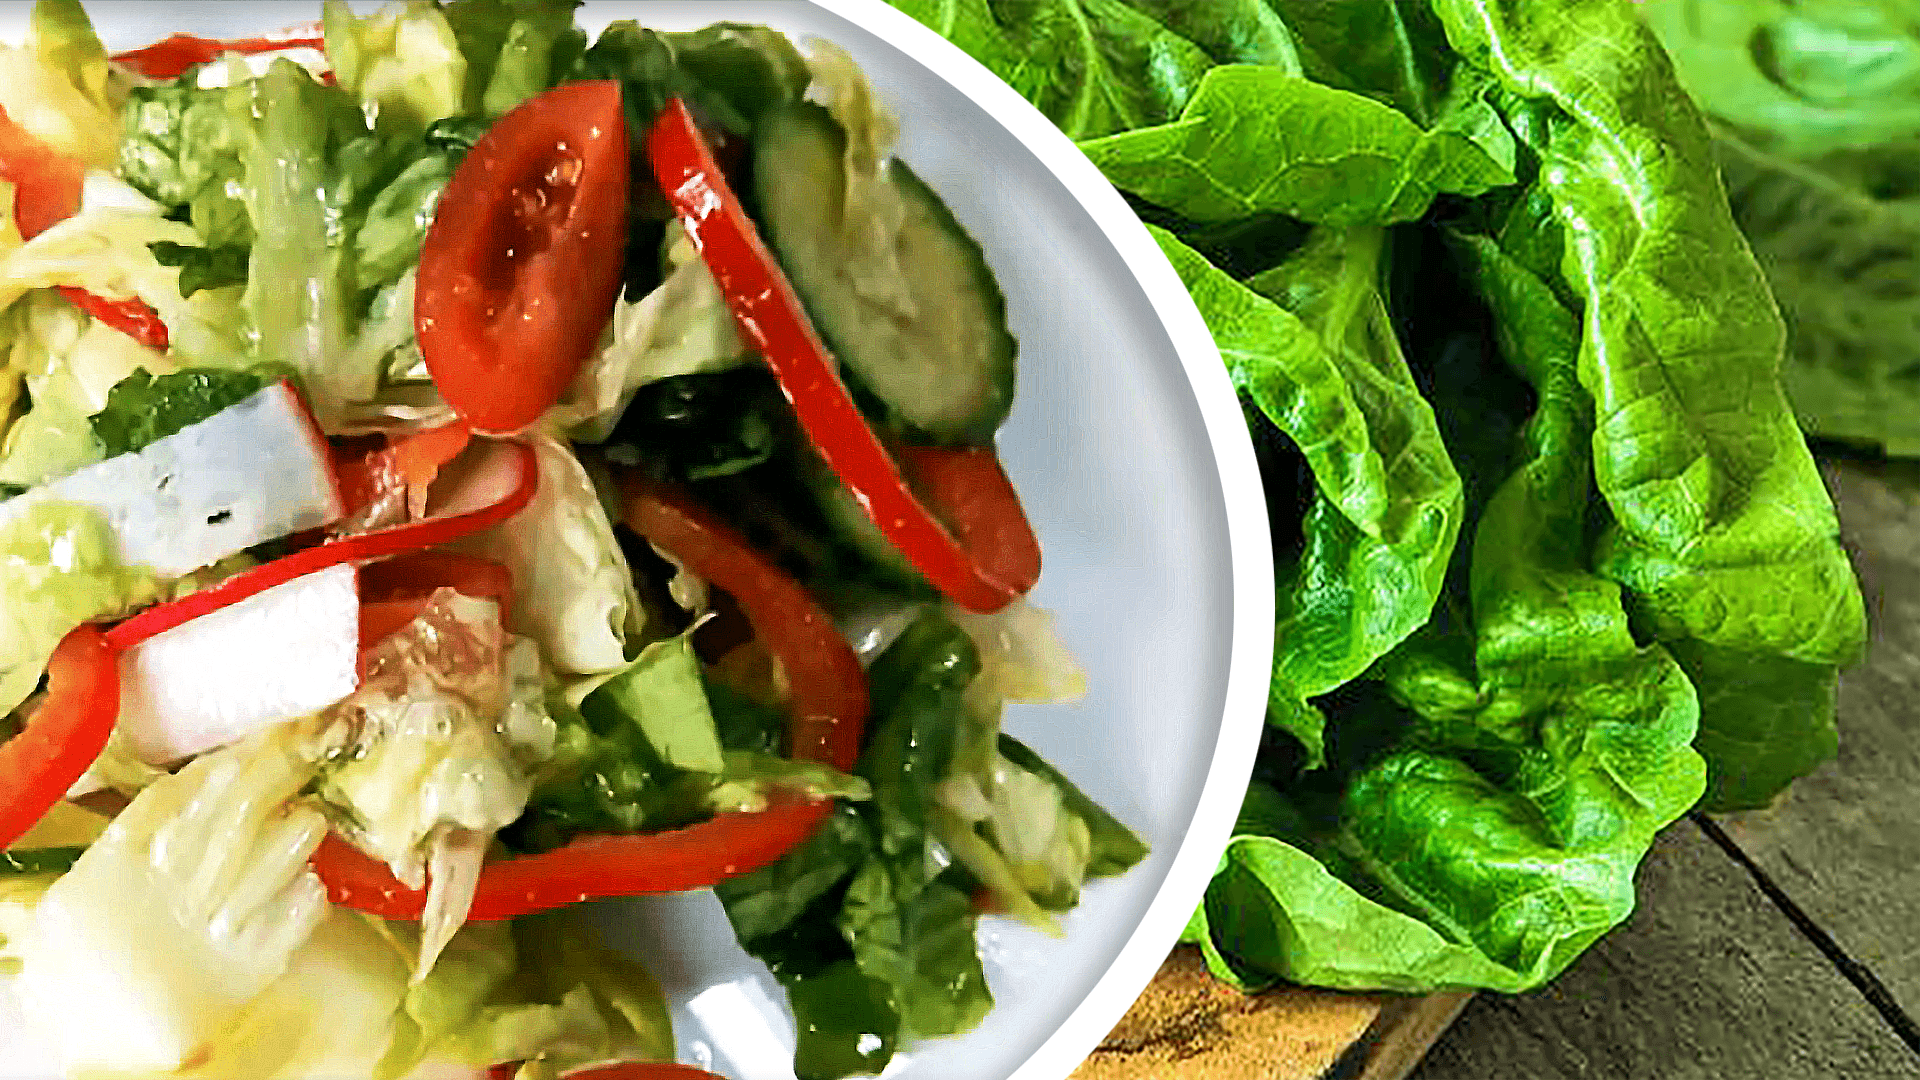 Mixed Vegetable Salad Recipe with Lettuce